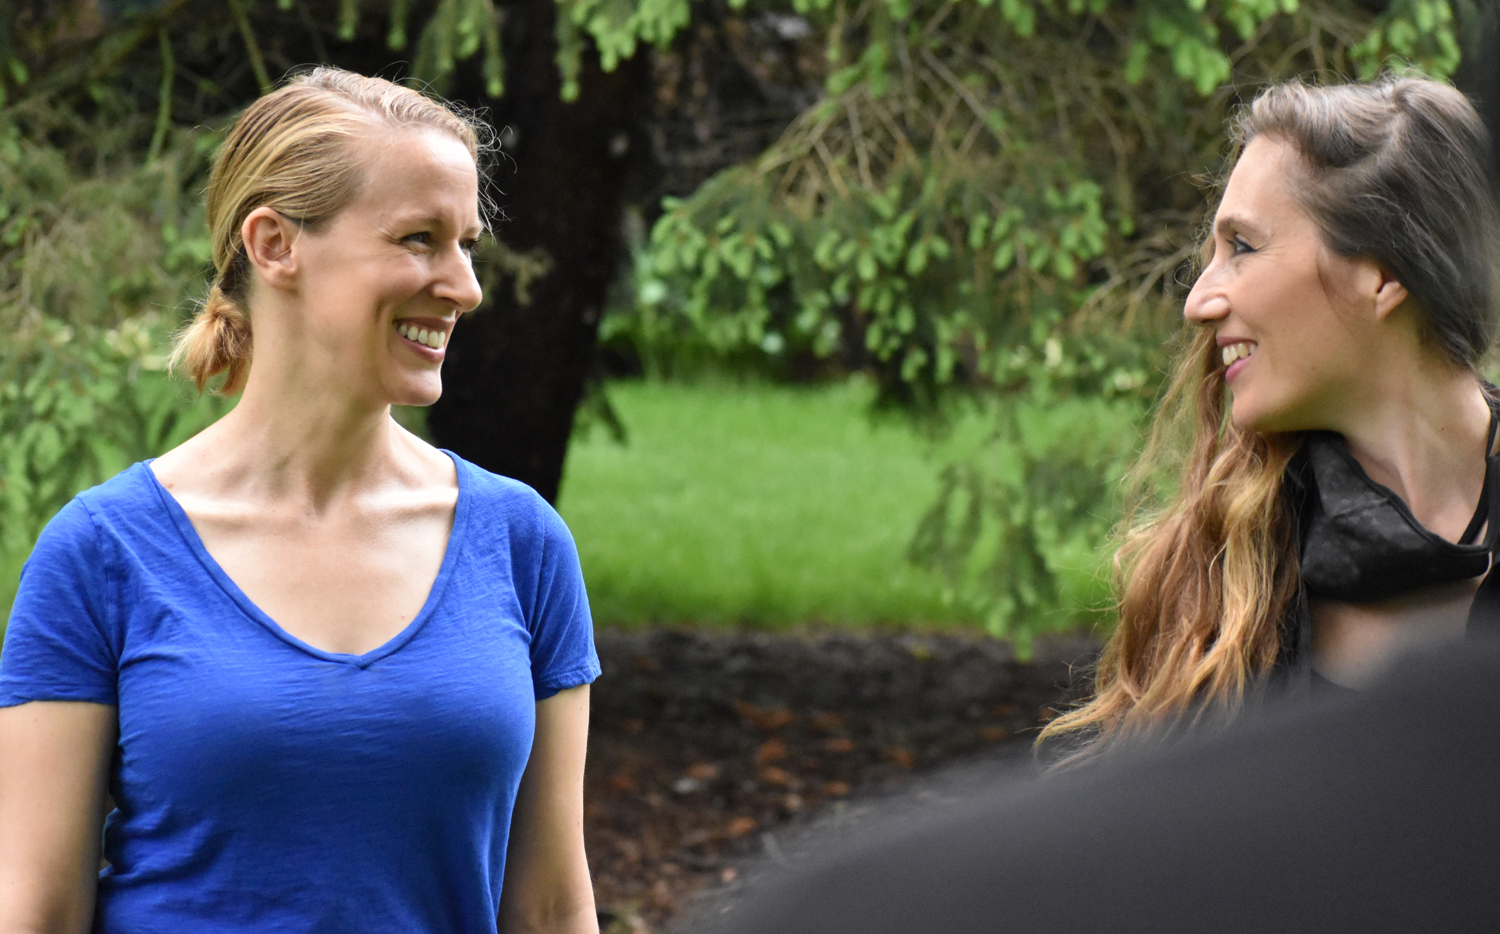 Two women actors smile while doing an activity outdoors